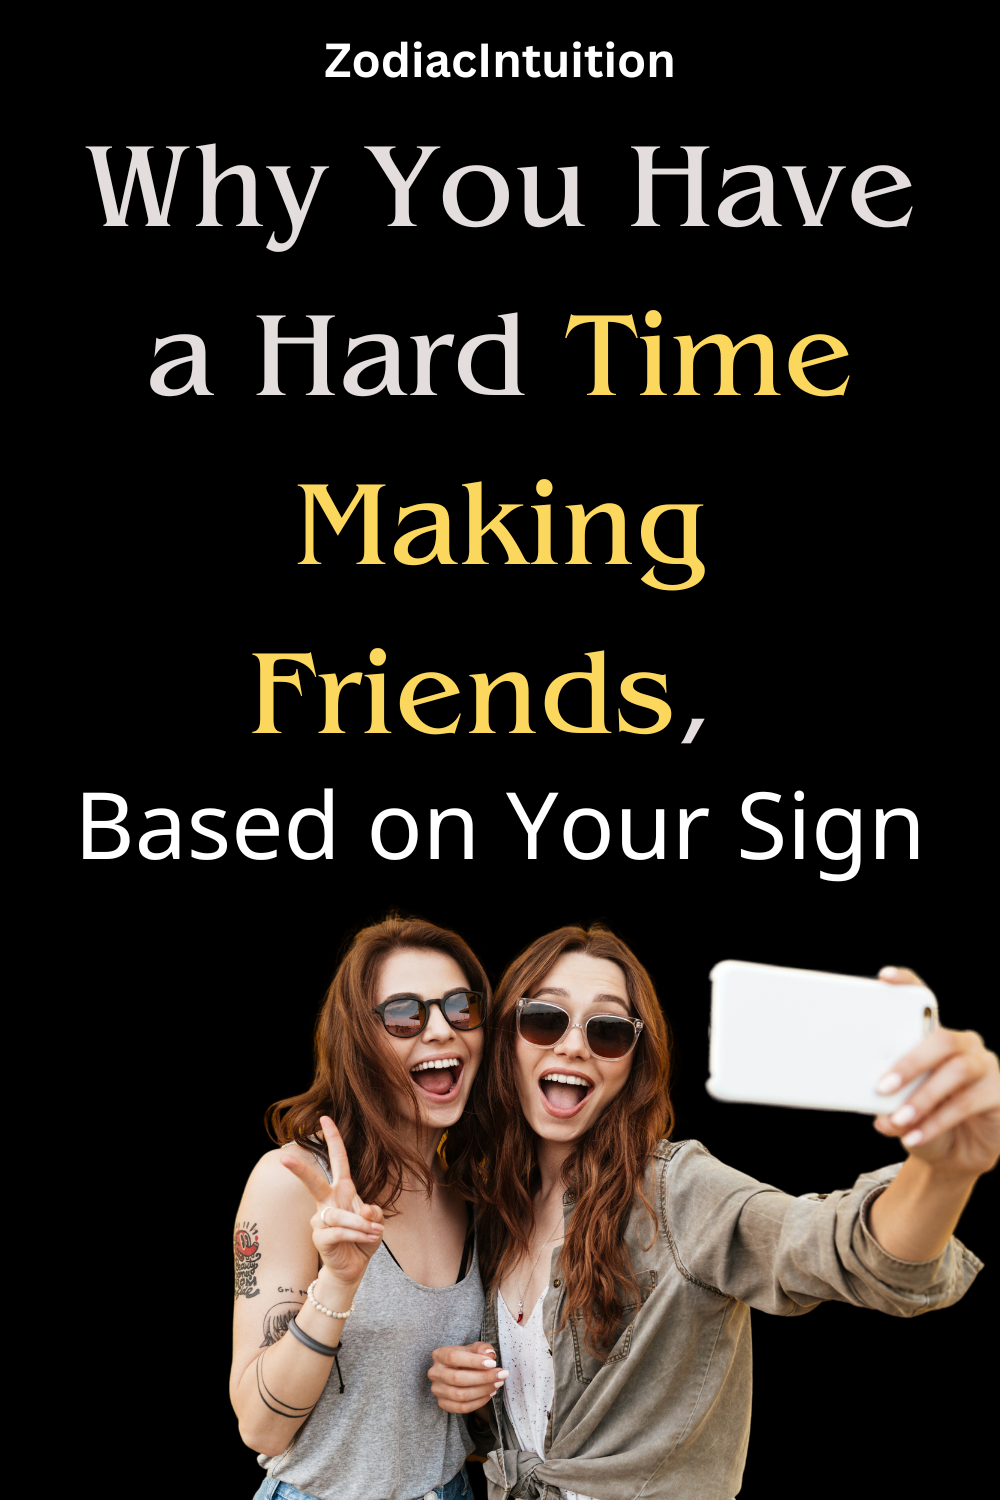 Why You Have a Hard Time Making Friends, Based on Your Sign